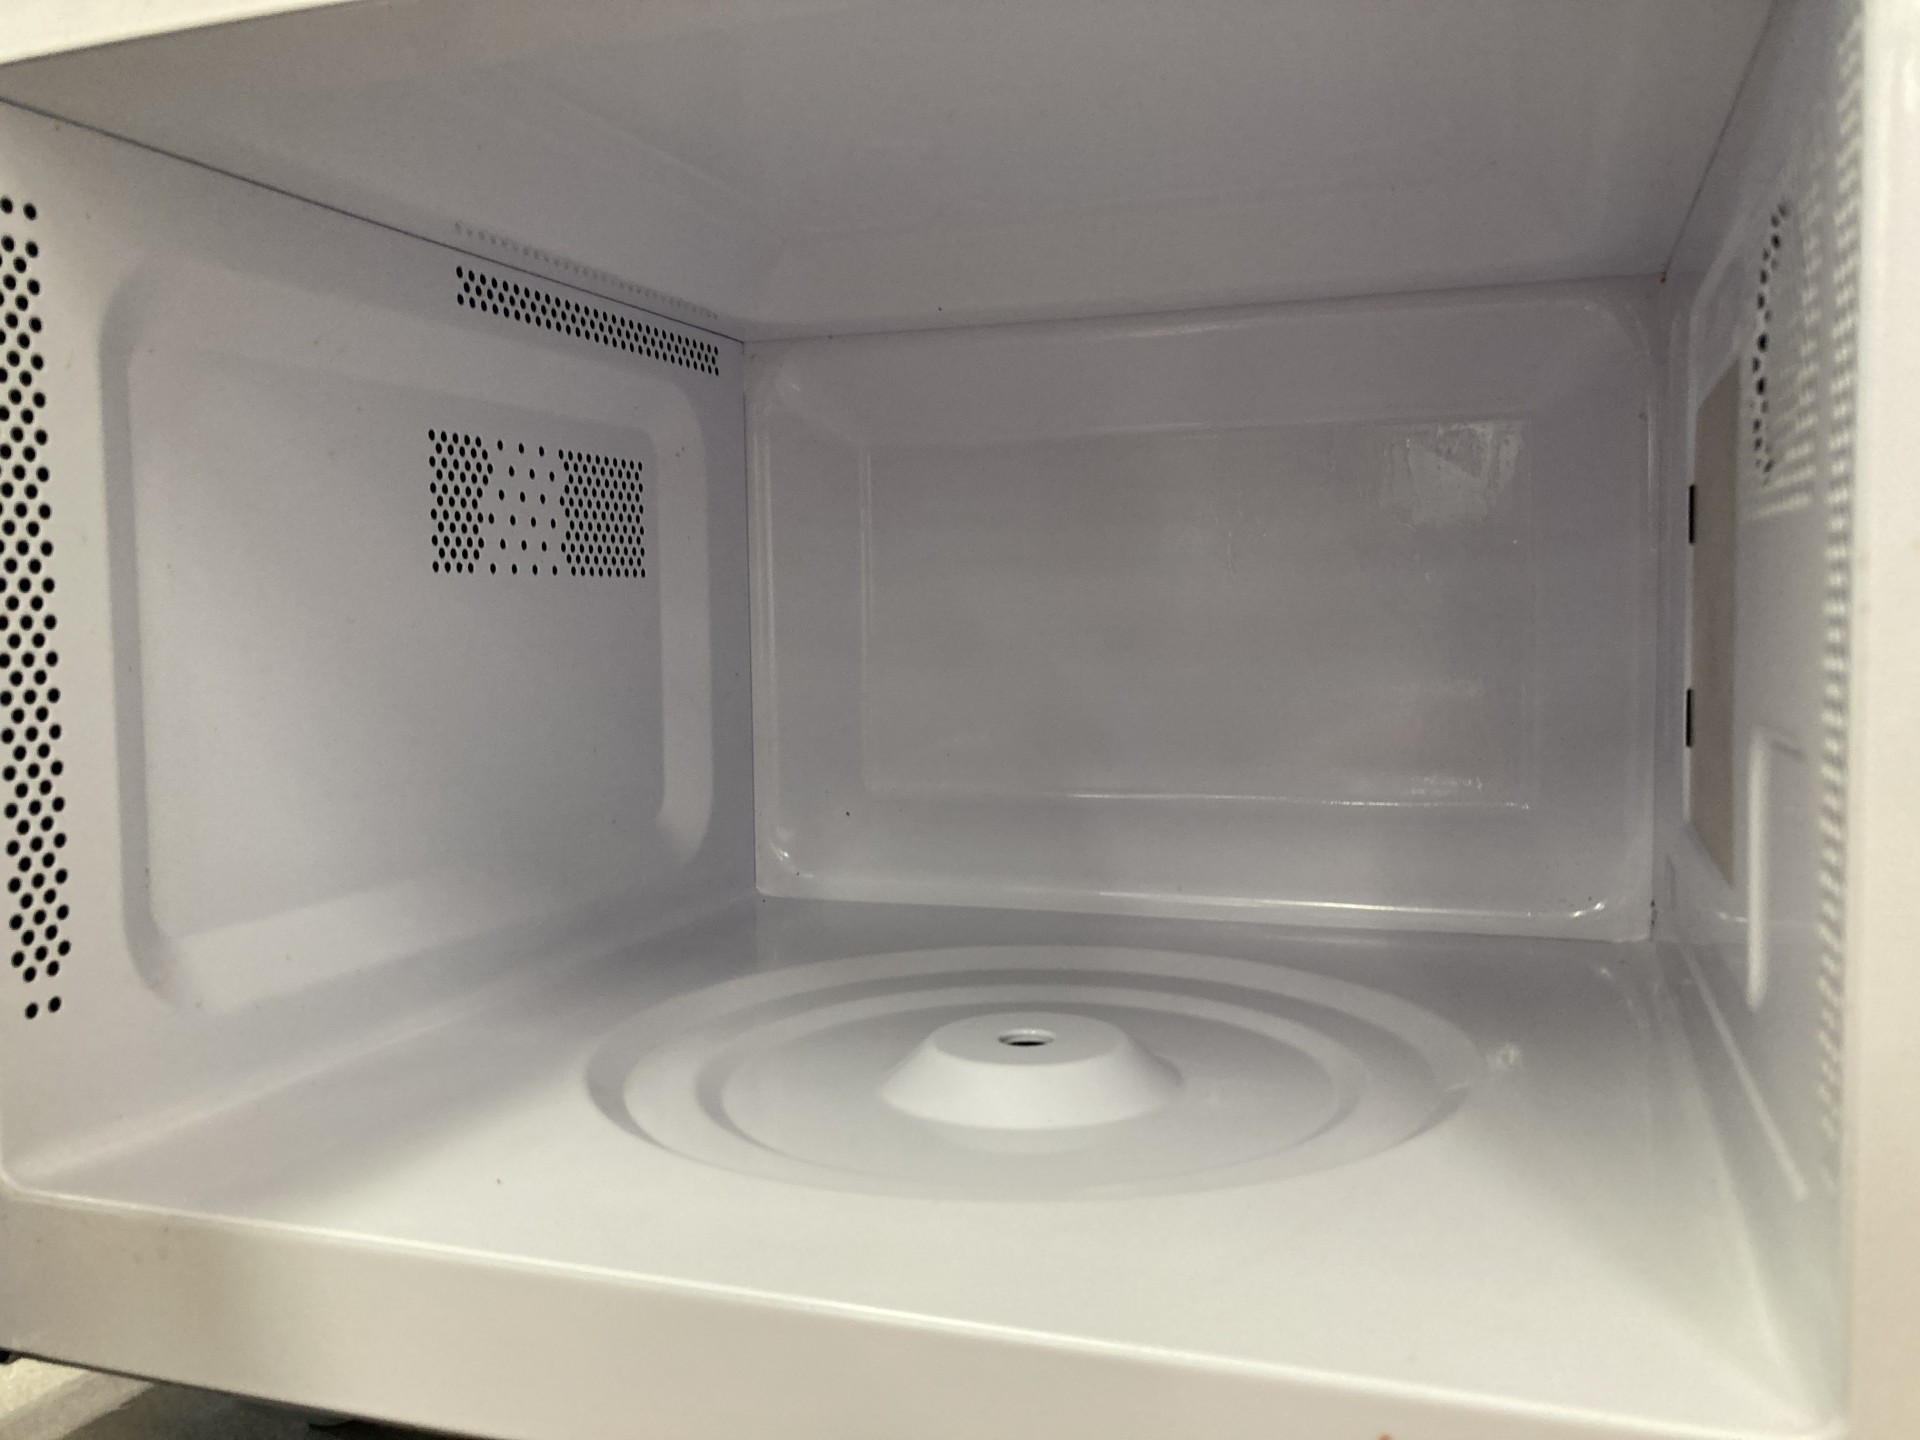 A Cleaner Microwave!